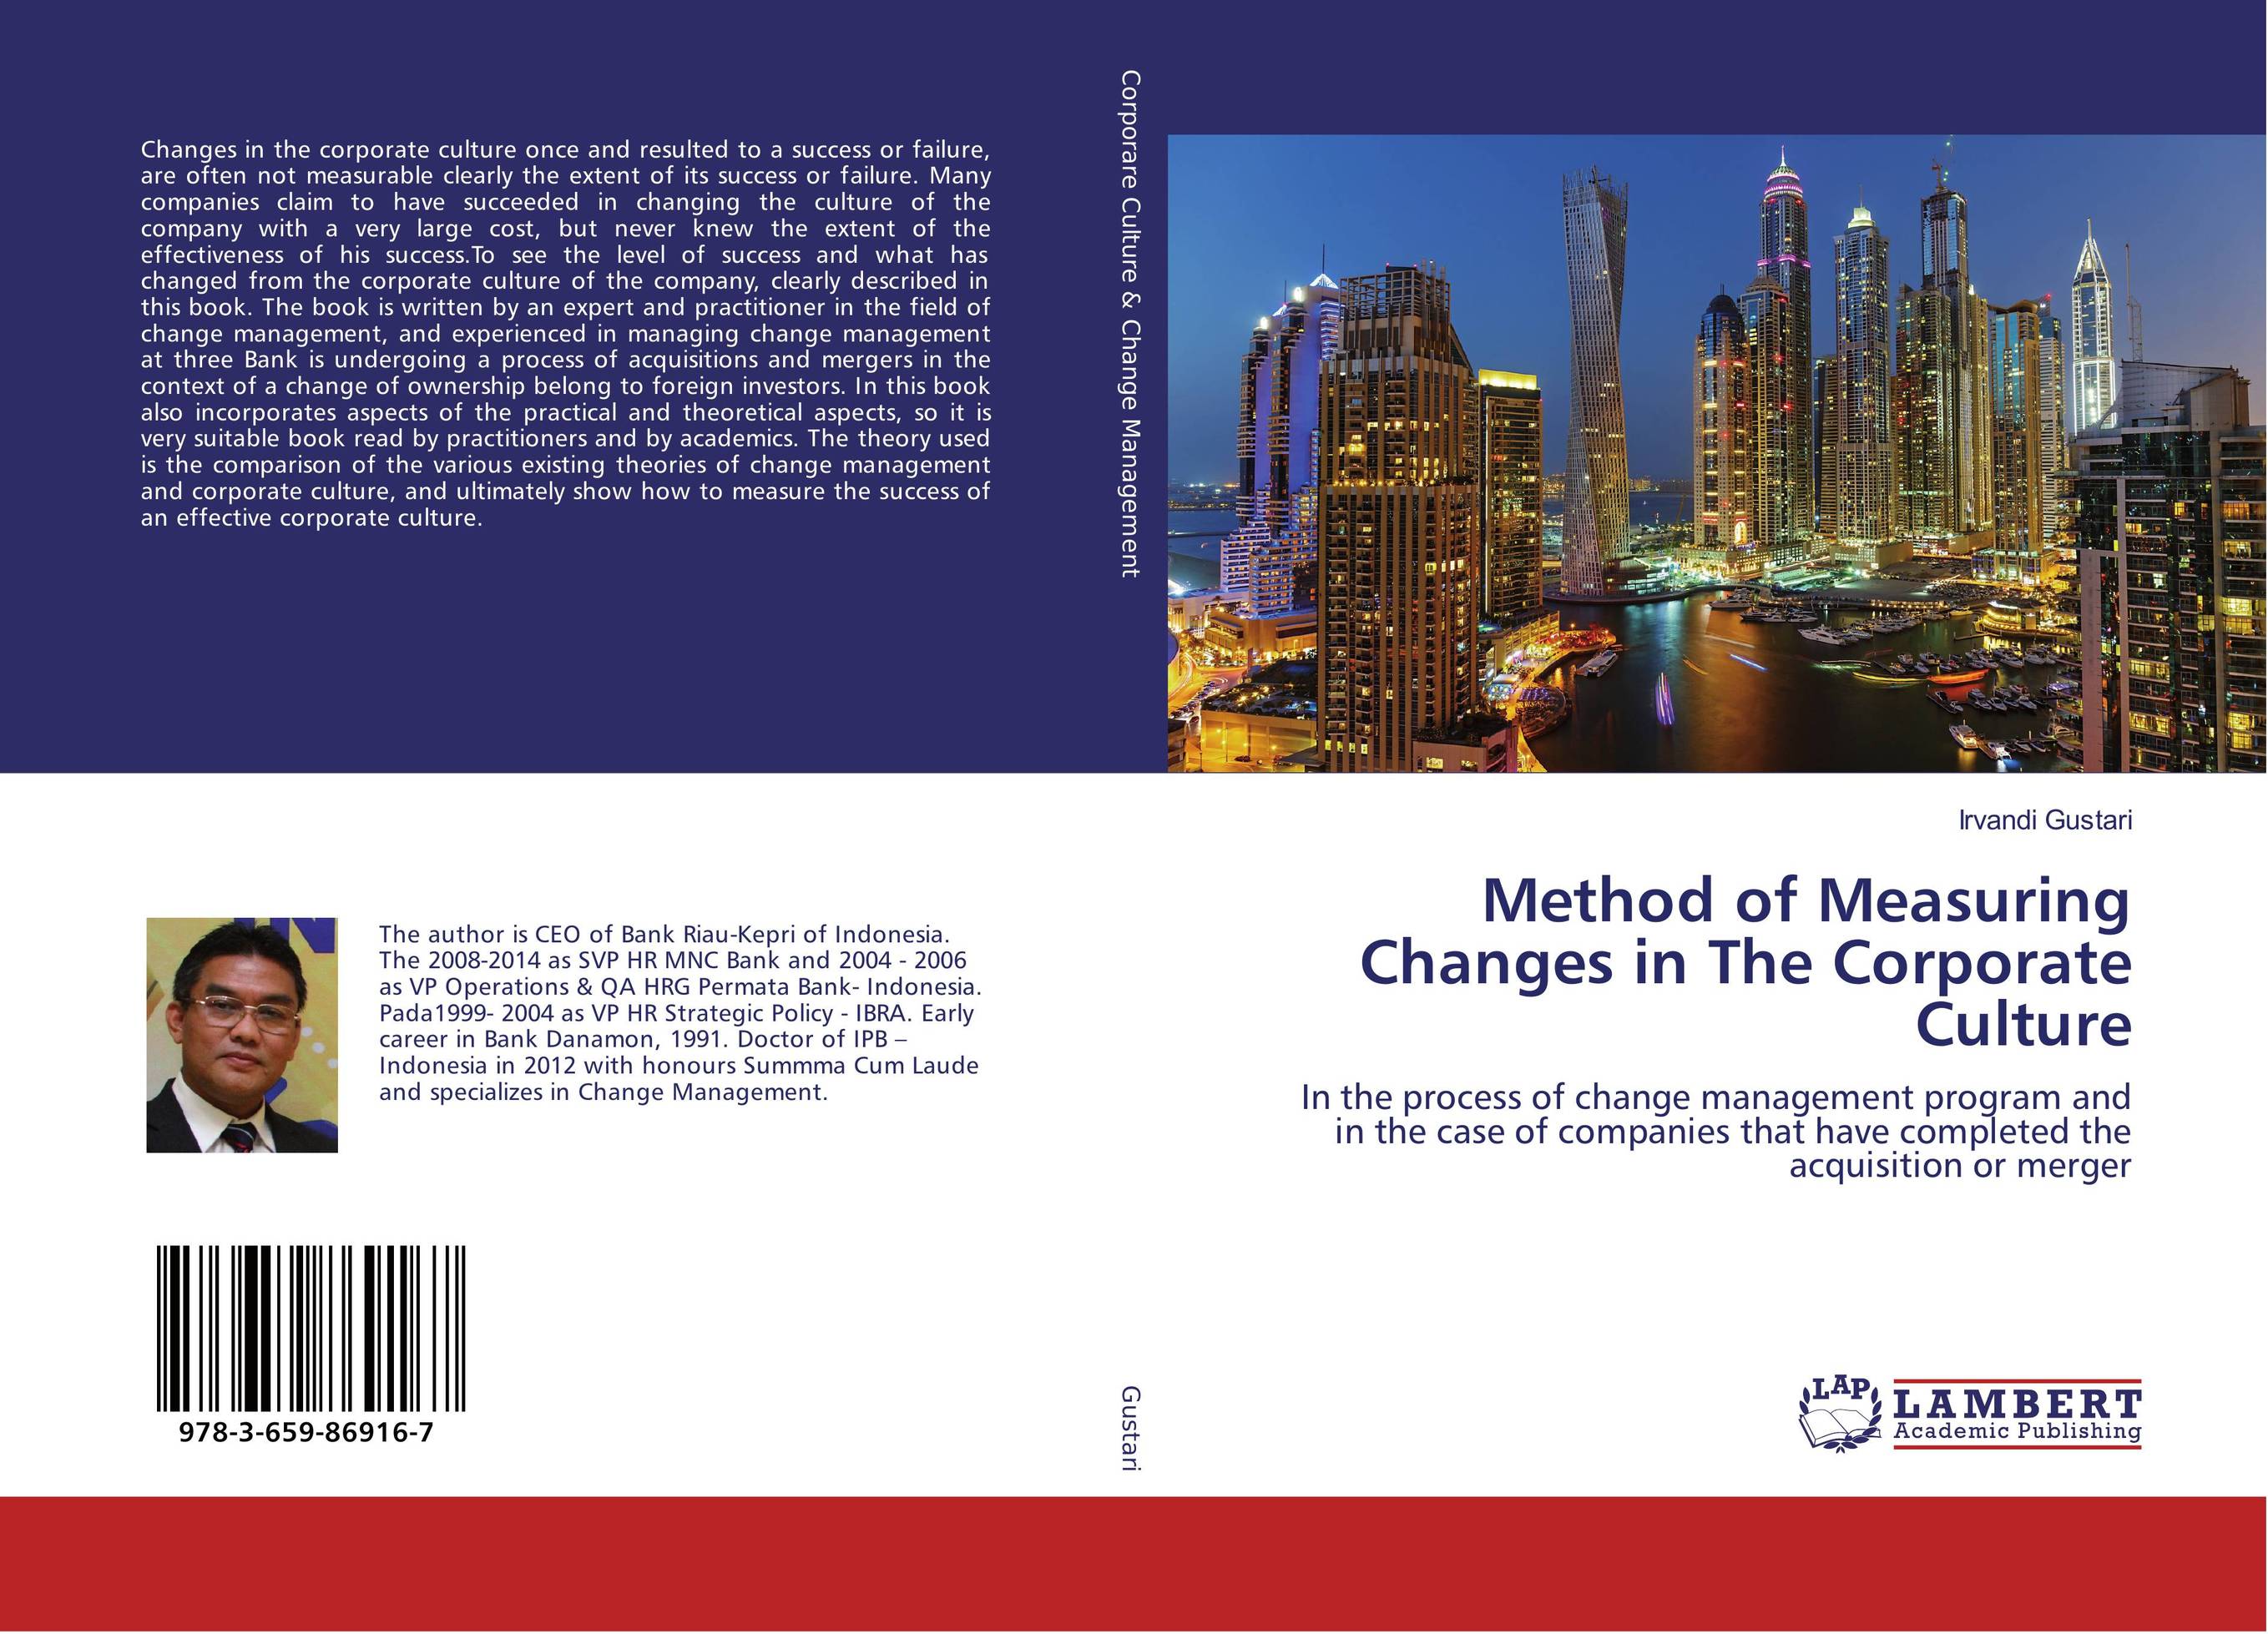 Method of Measuring Changes in The Corporate Culture